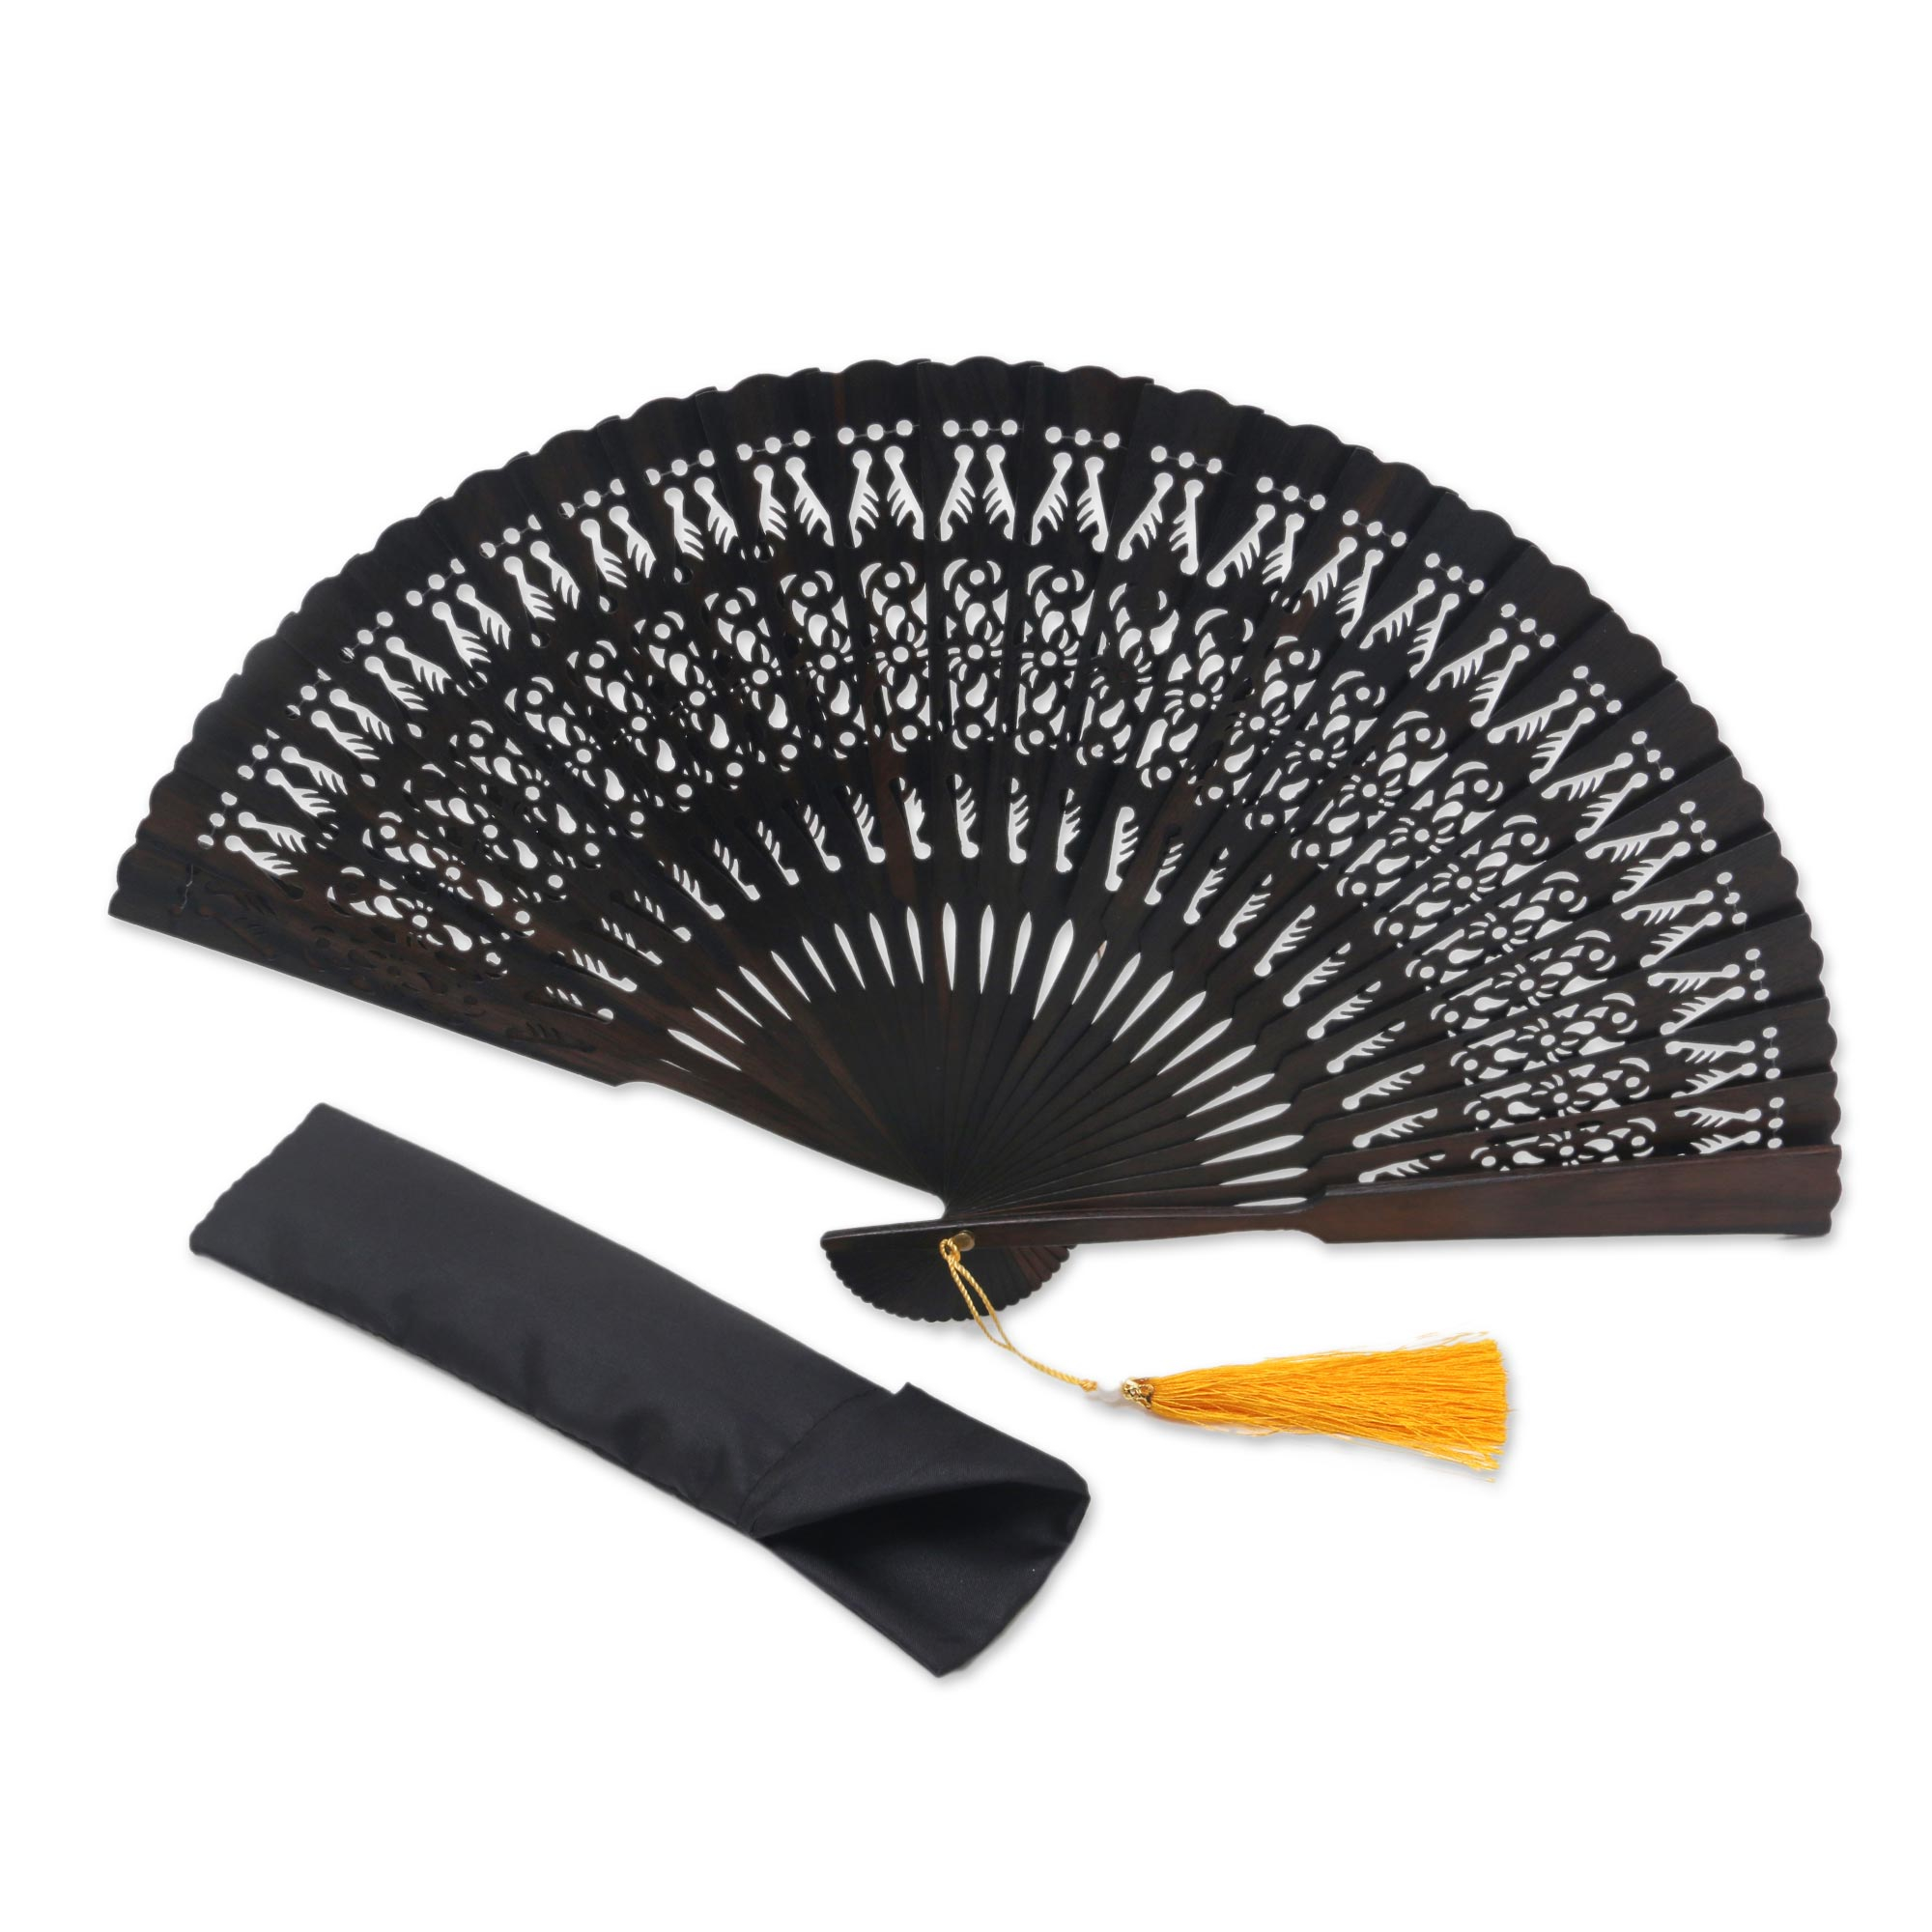 Hand Made Ebony Wood Fan with Pouch from Indonesia - Serenity Bloom in ...